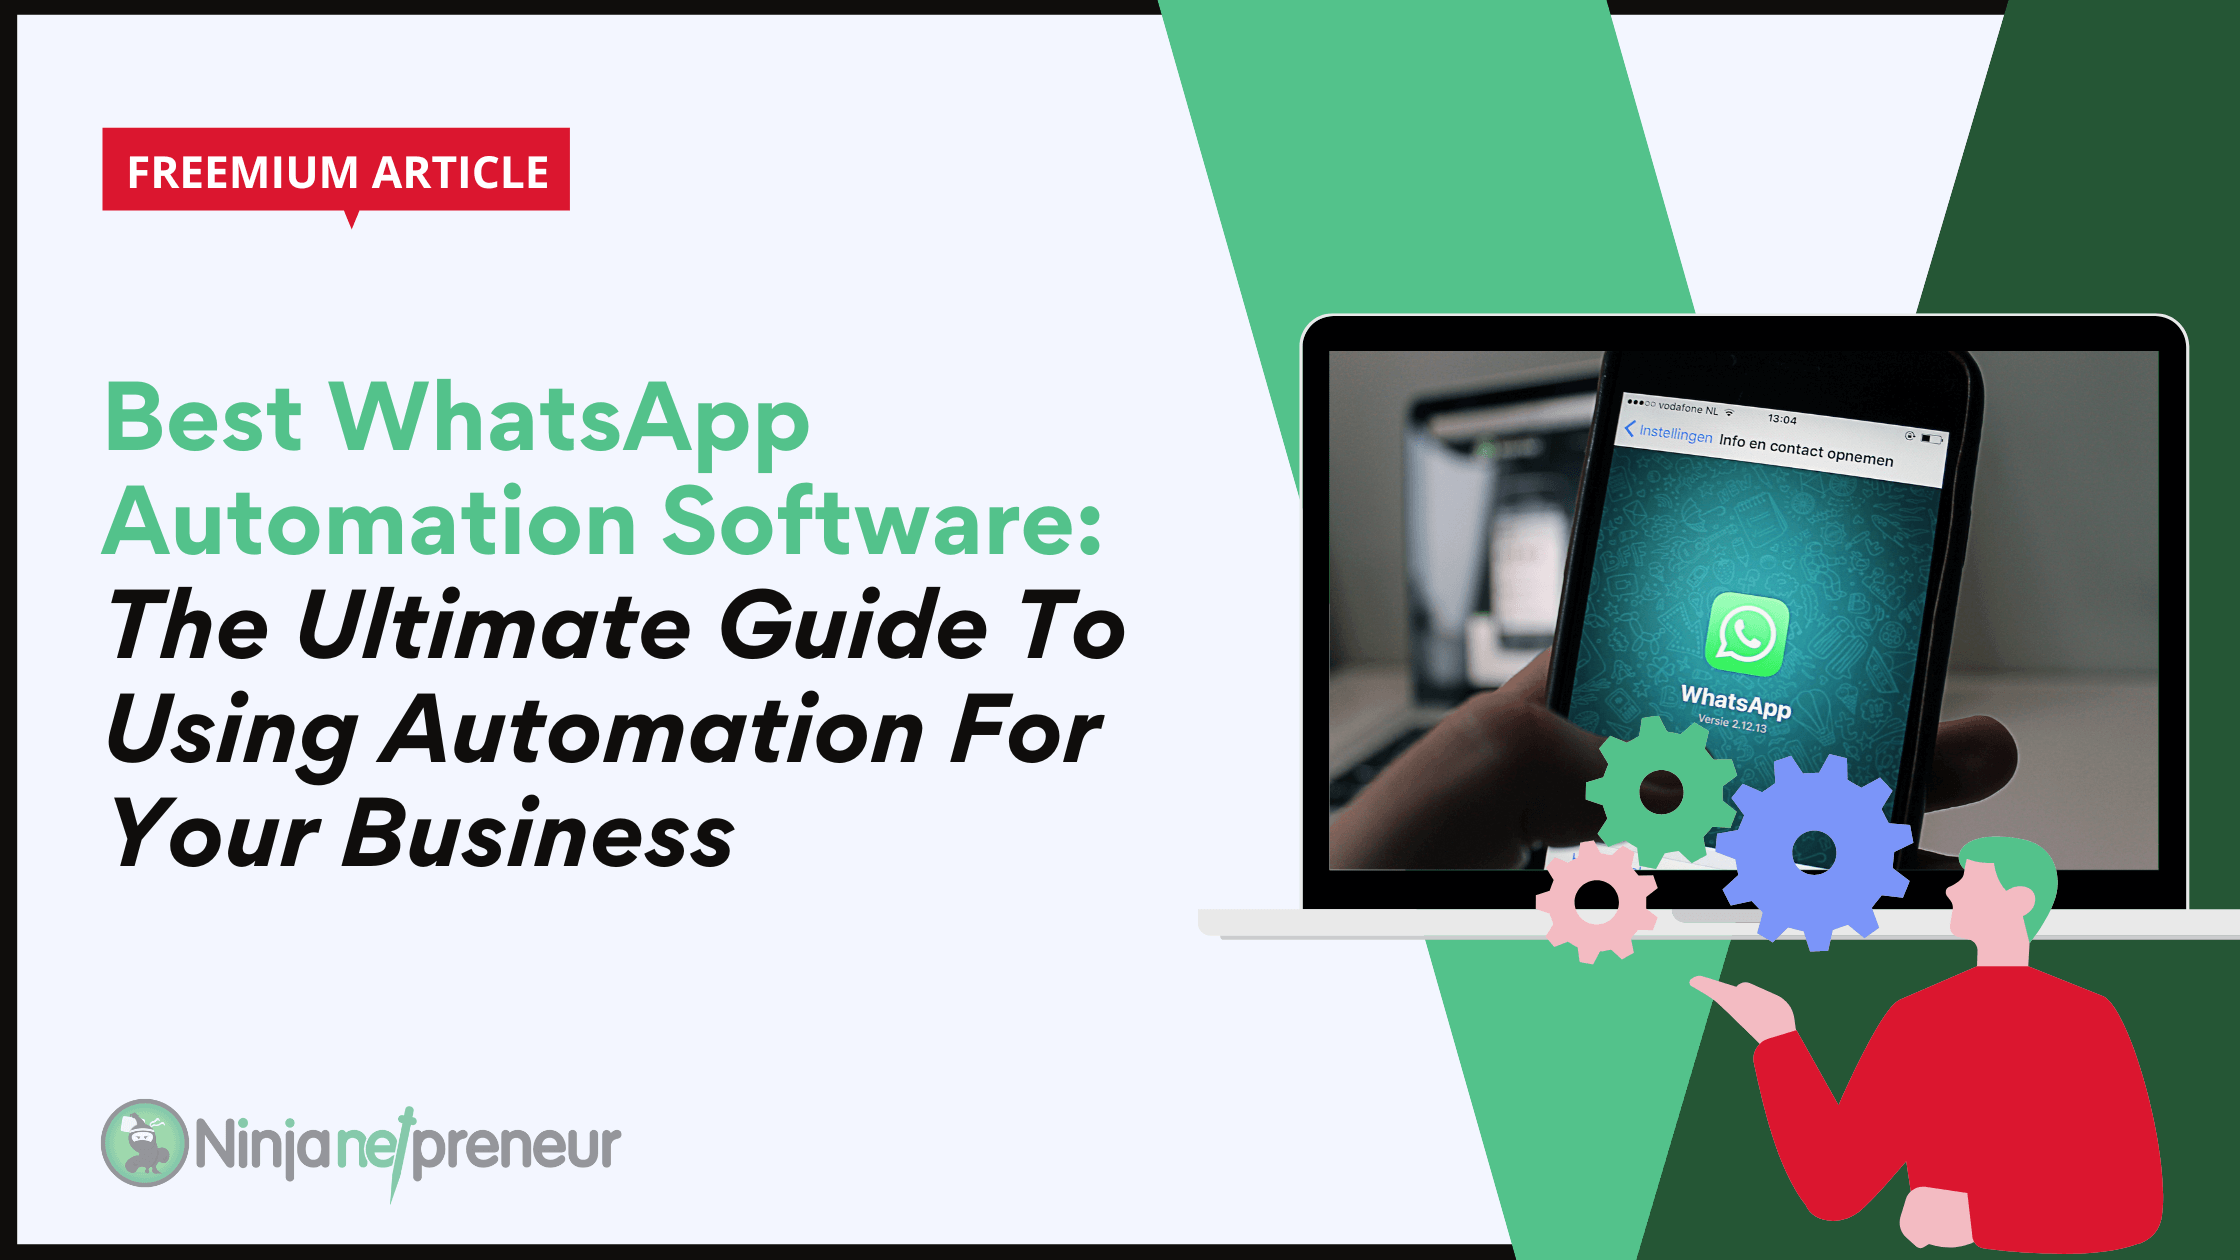 Best WhatsApp Automation Software: The Ultimate Guide To Using Automation For Your Business